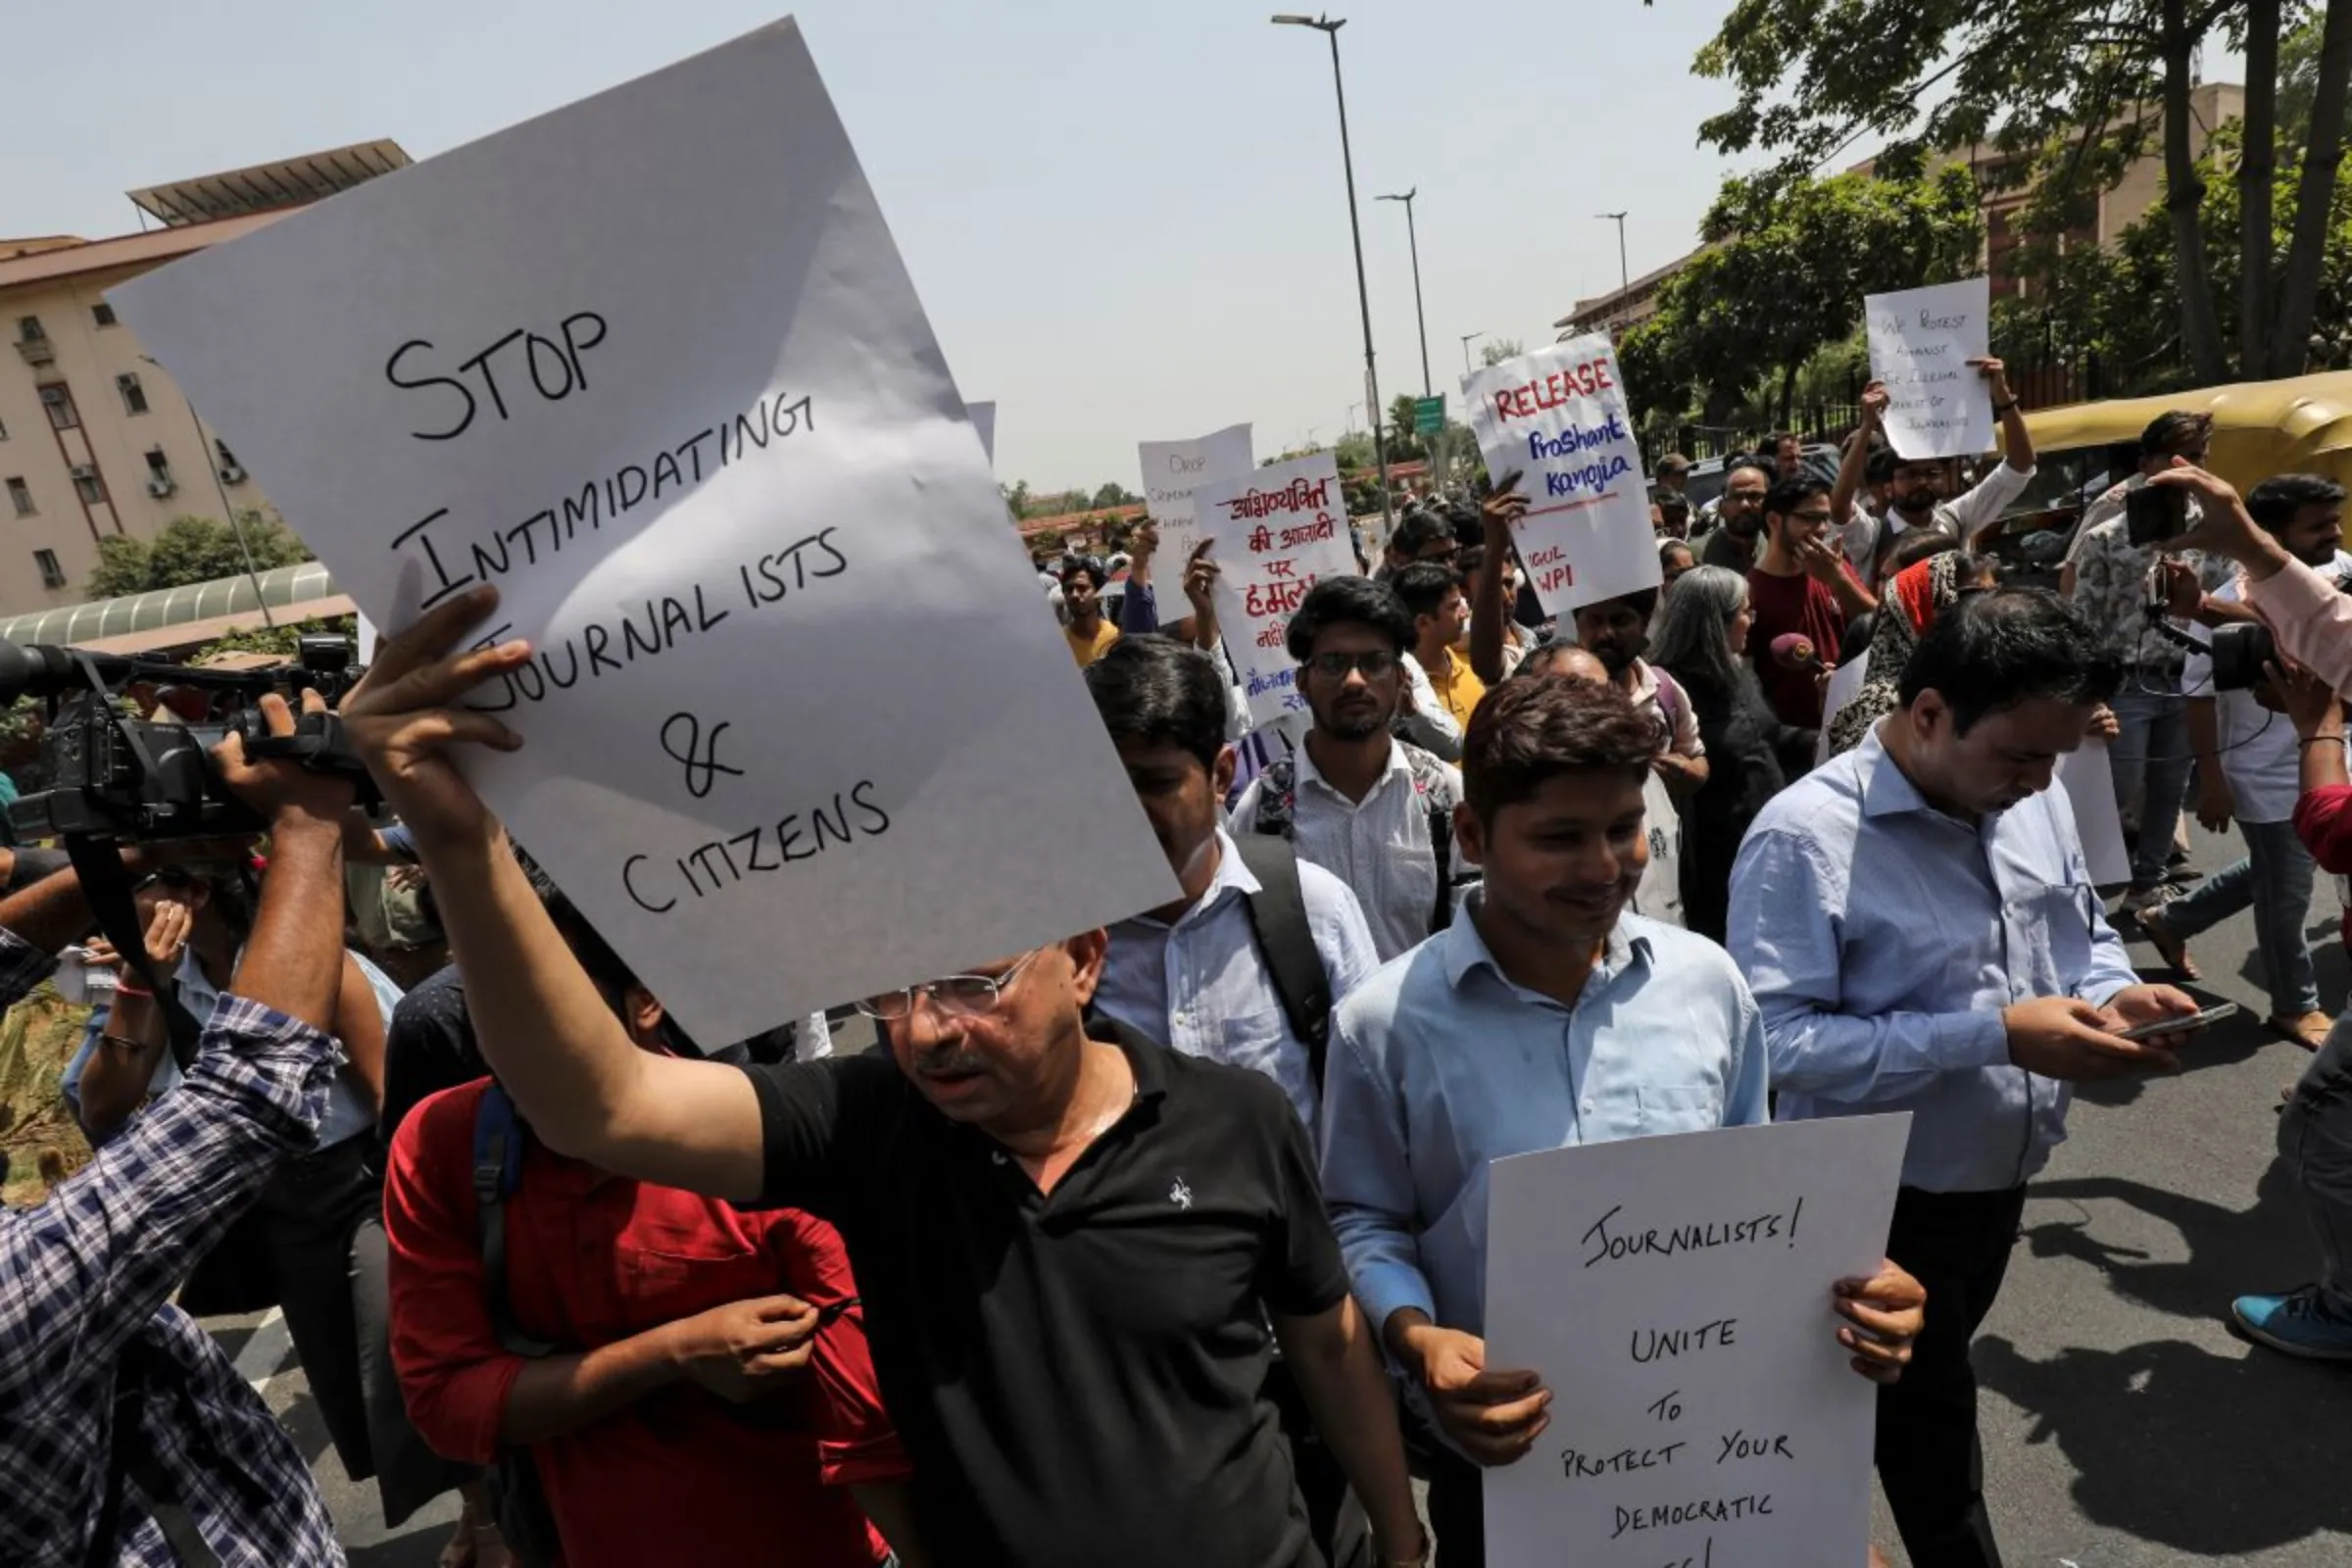 Media members protest against the arrest of journalists for allegedly posting defamatory content on social media against Uttar Pradesh's Chief Minister Yogi Adityanath, in New Delhi, India June 10, 2019